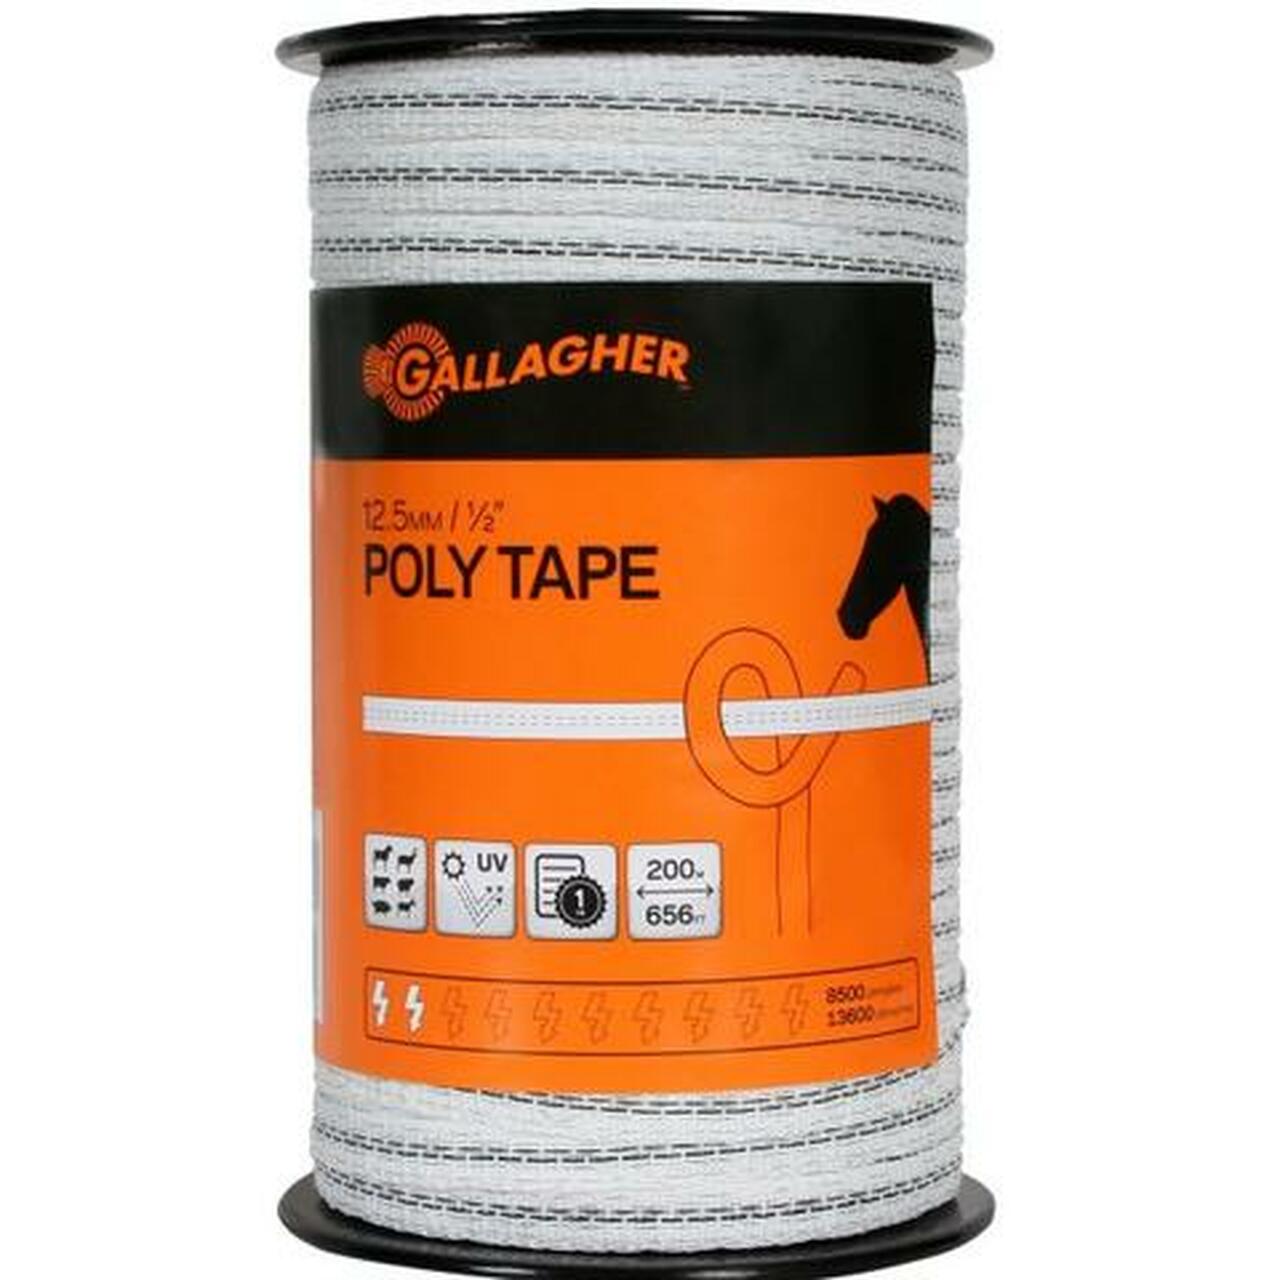 Gallagher Poly Tape Wire